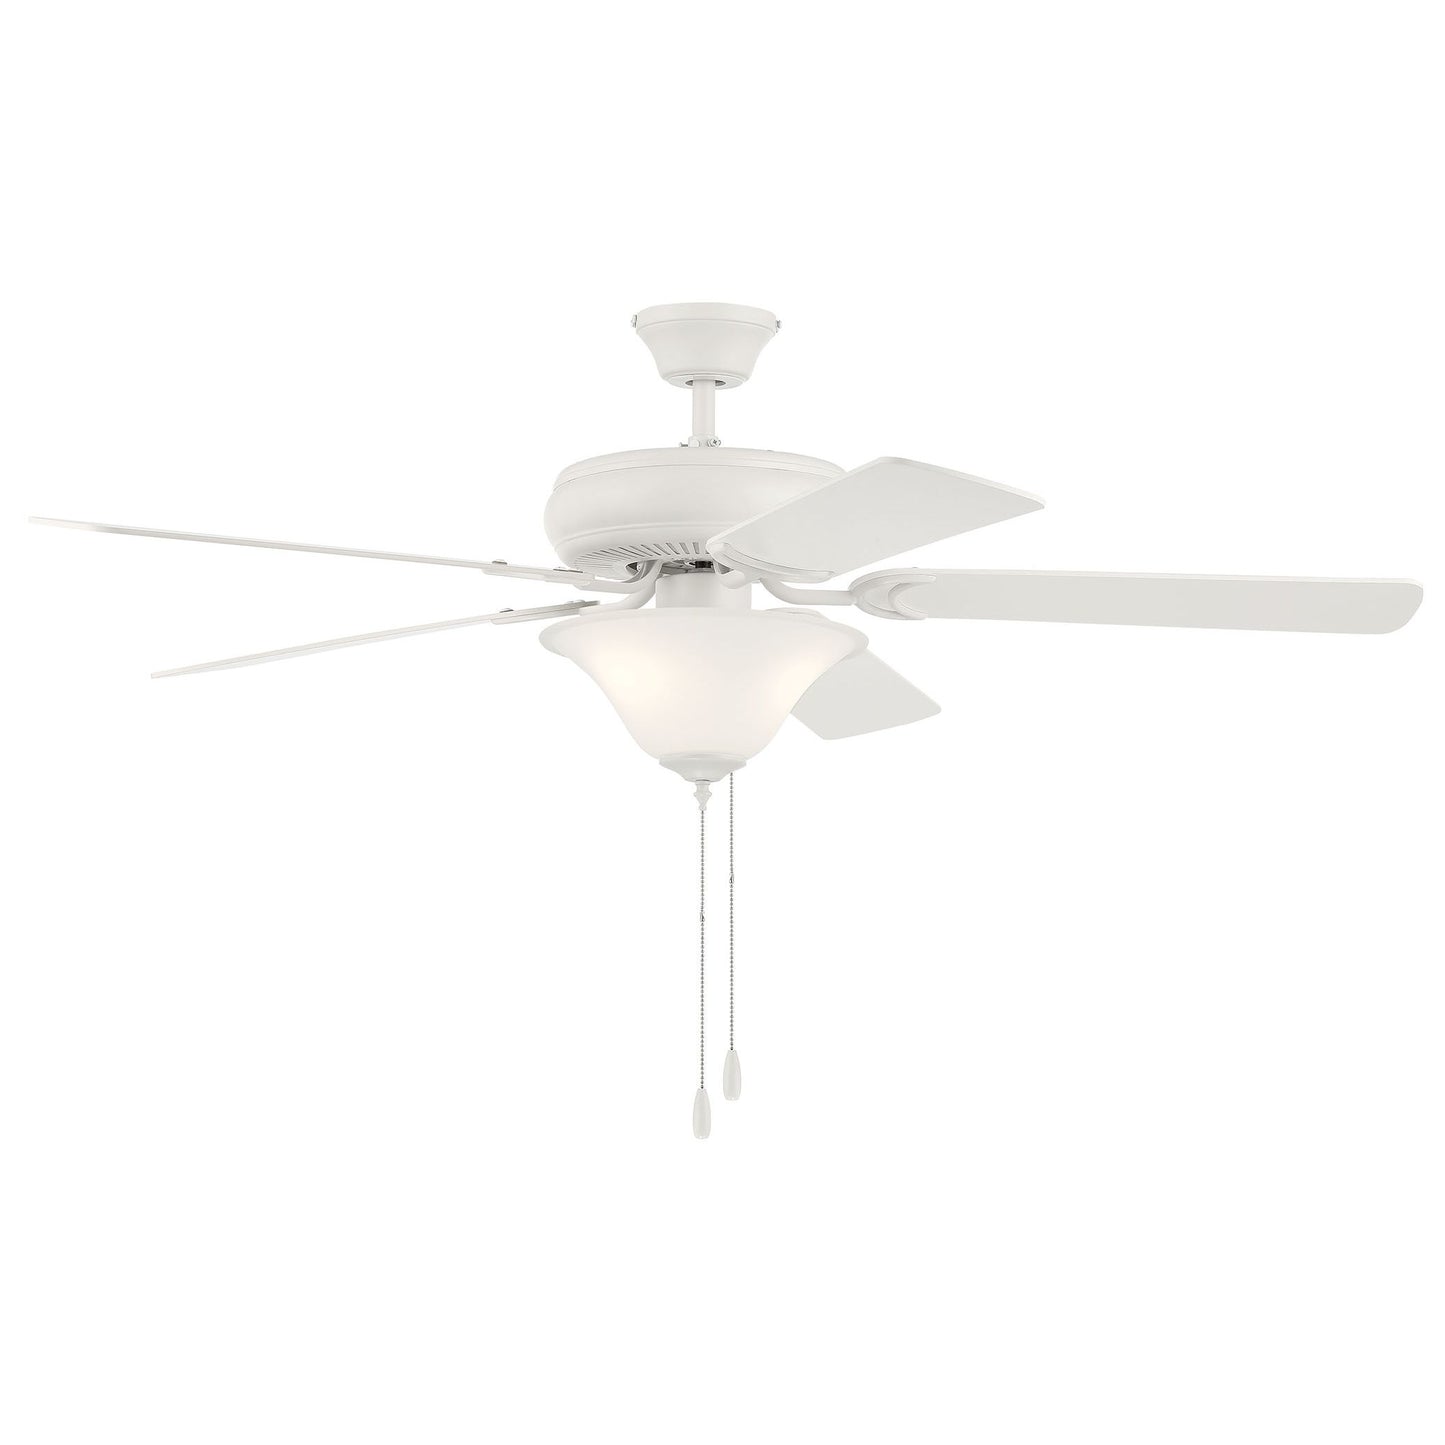 DCF52W5C1W - Decorator's Choice 52" 5 Blade Ceiling Fan with Light Kit - Pull Chain - Matte White